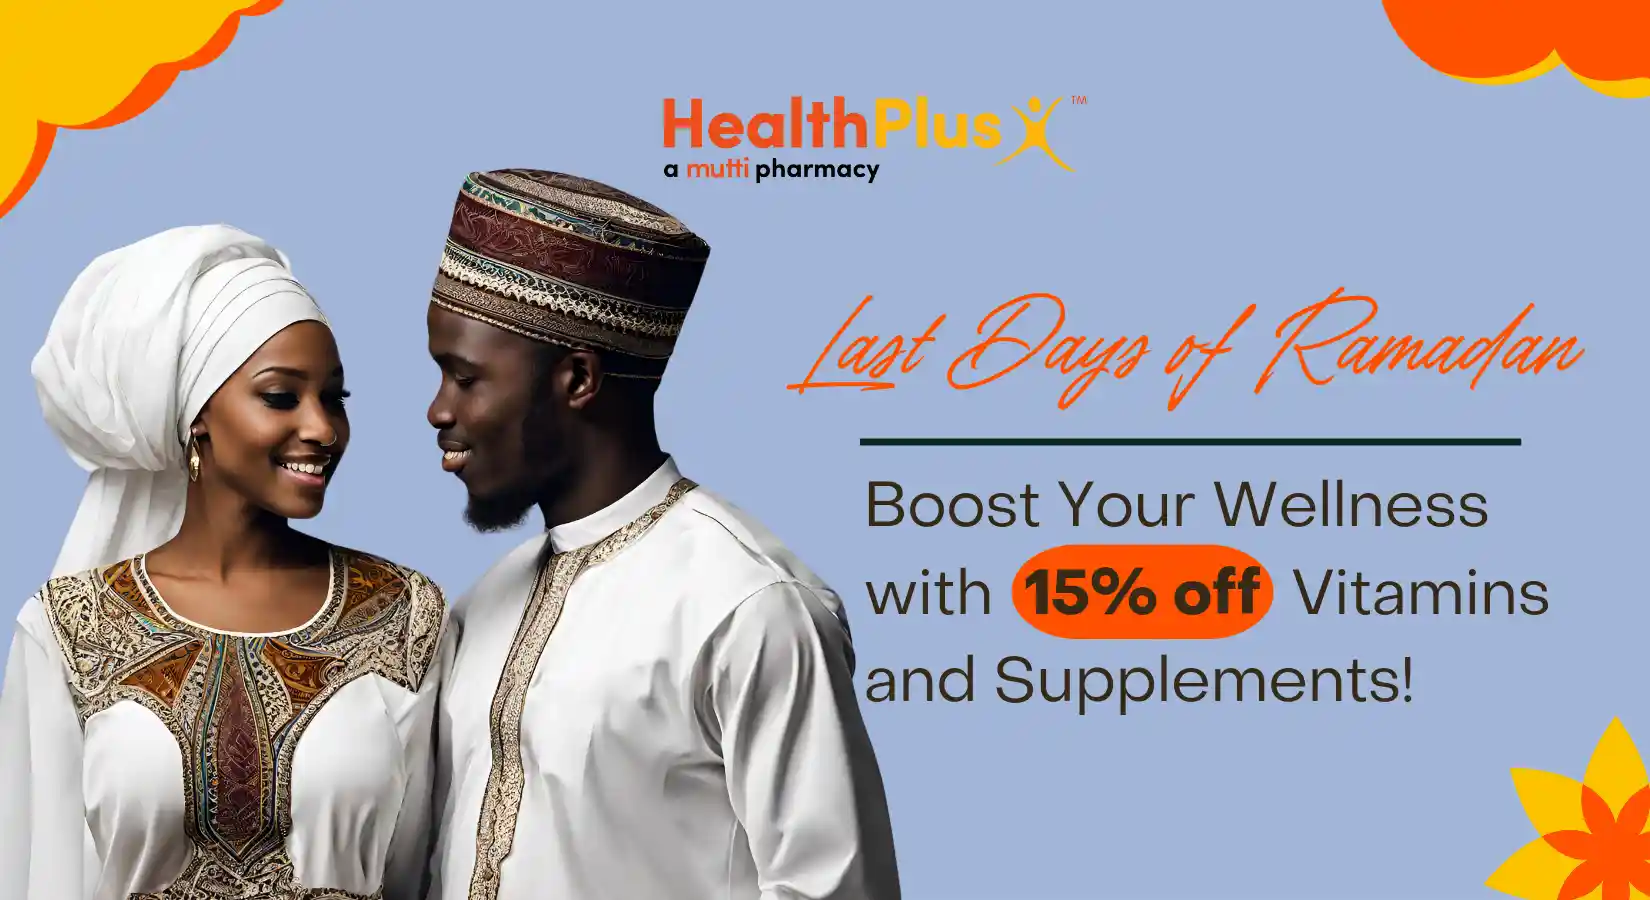 Last Days of Ramadan: Boost Your Wellness with 15% Off Vitamins and Supplements!